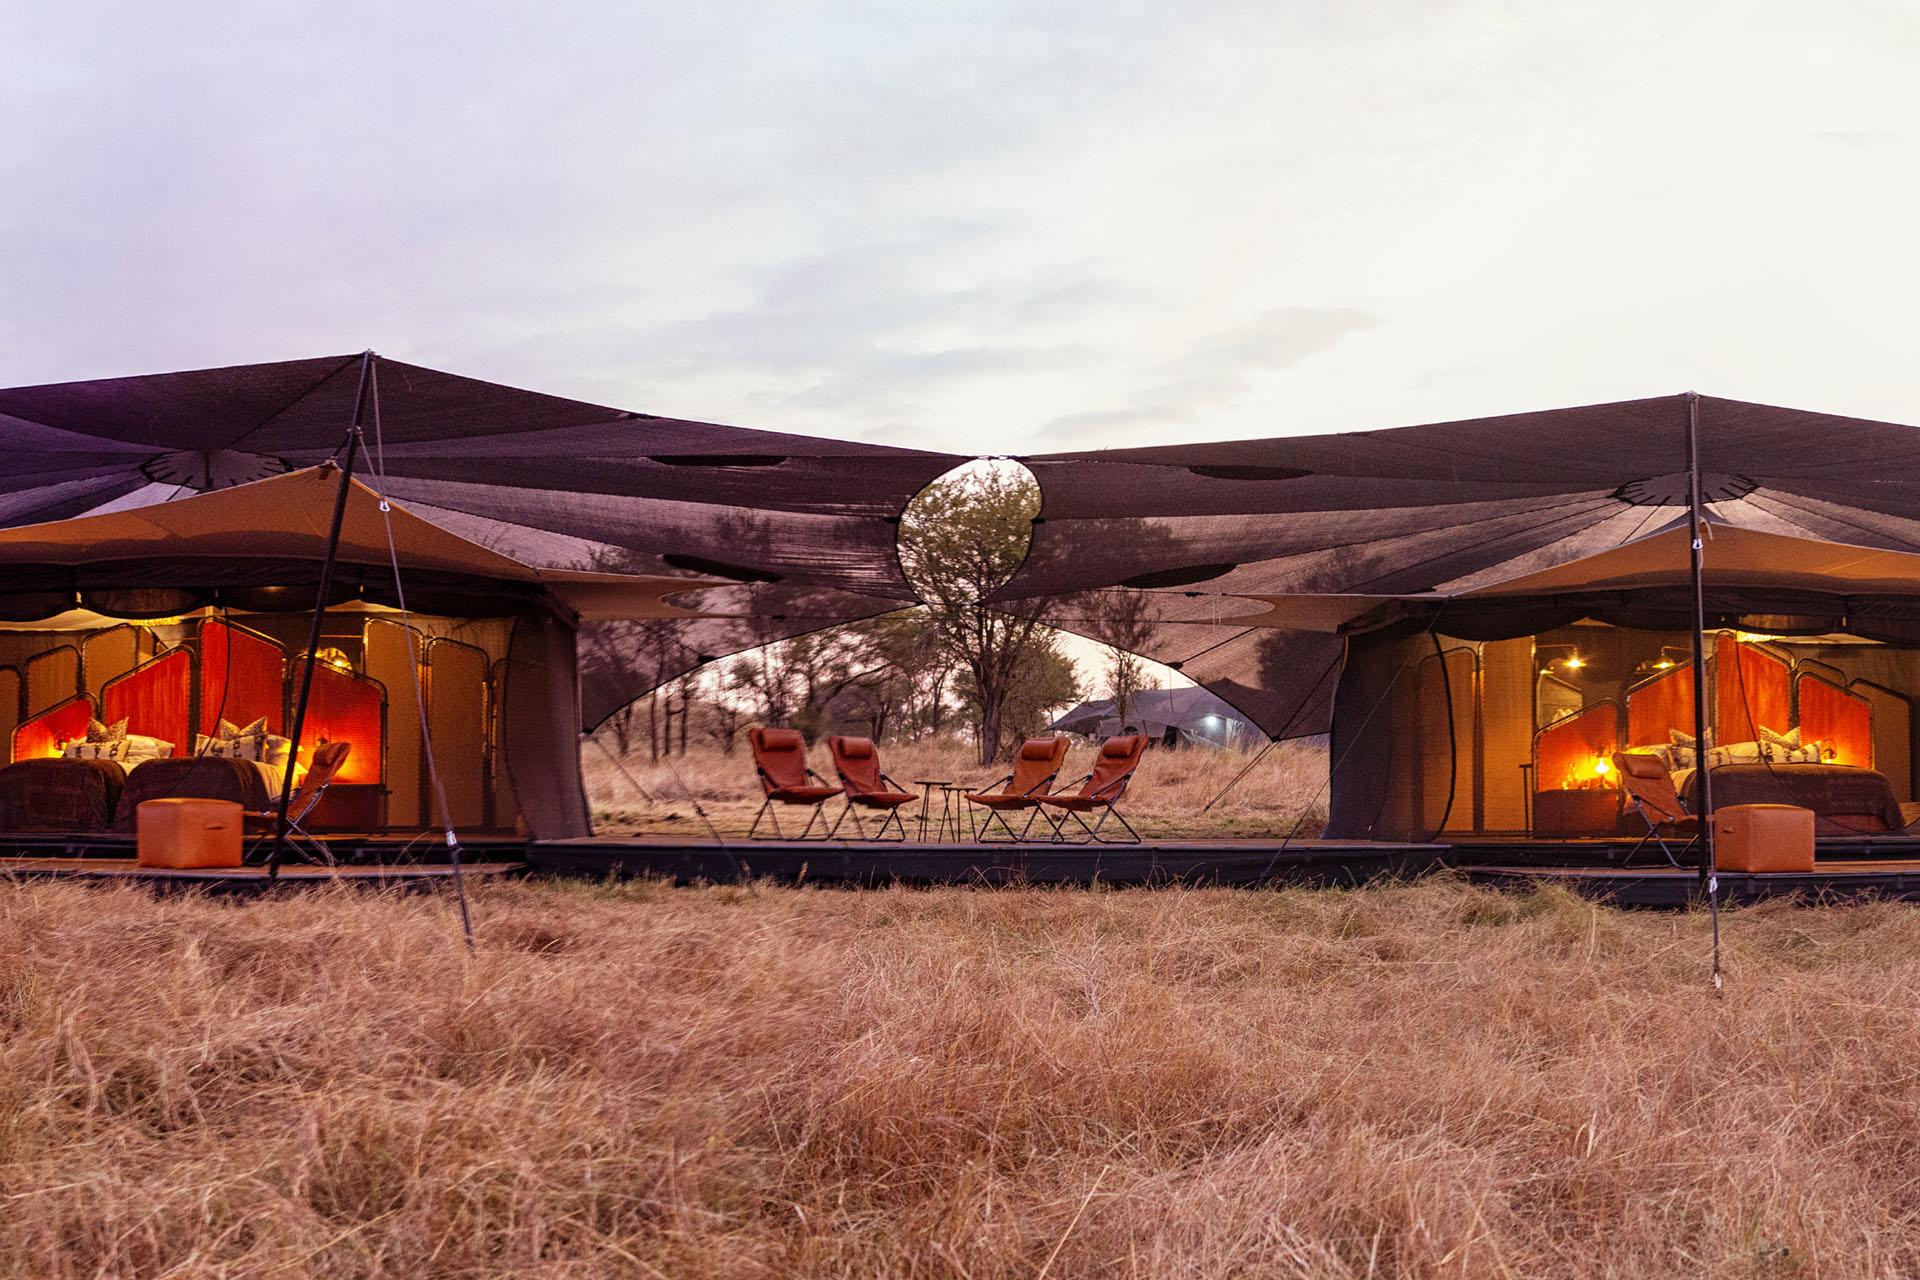 The Siringit Migration Camp has 8 luxury spacious canvas tents designed to bring you closer to the natural surroundings